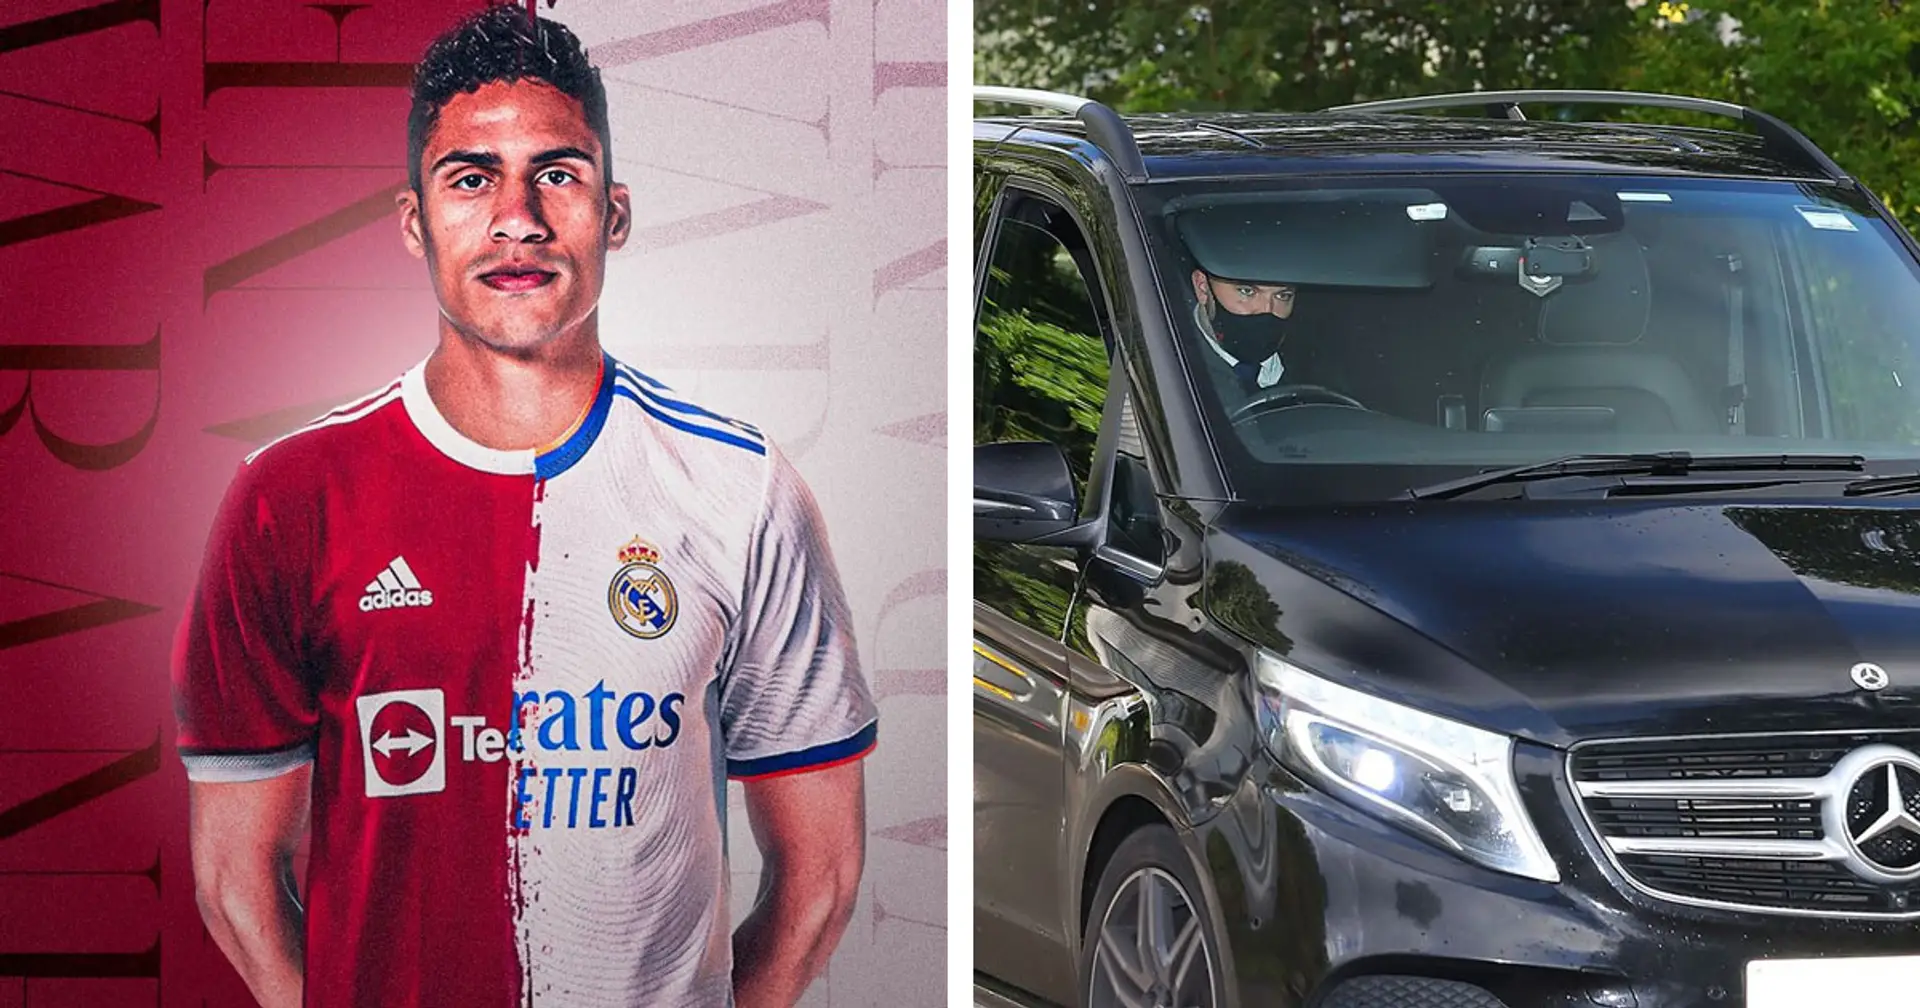 Varane completes first part of medicals, set to seal United deal 'in 24-48 hours'